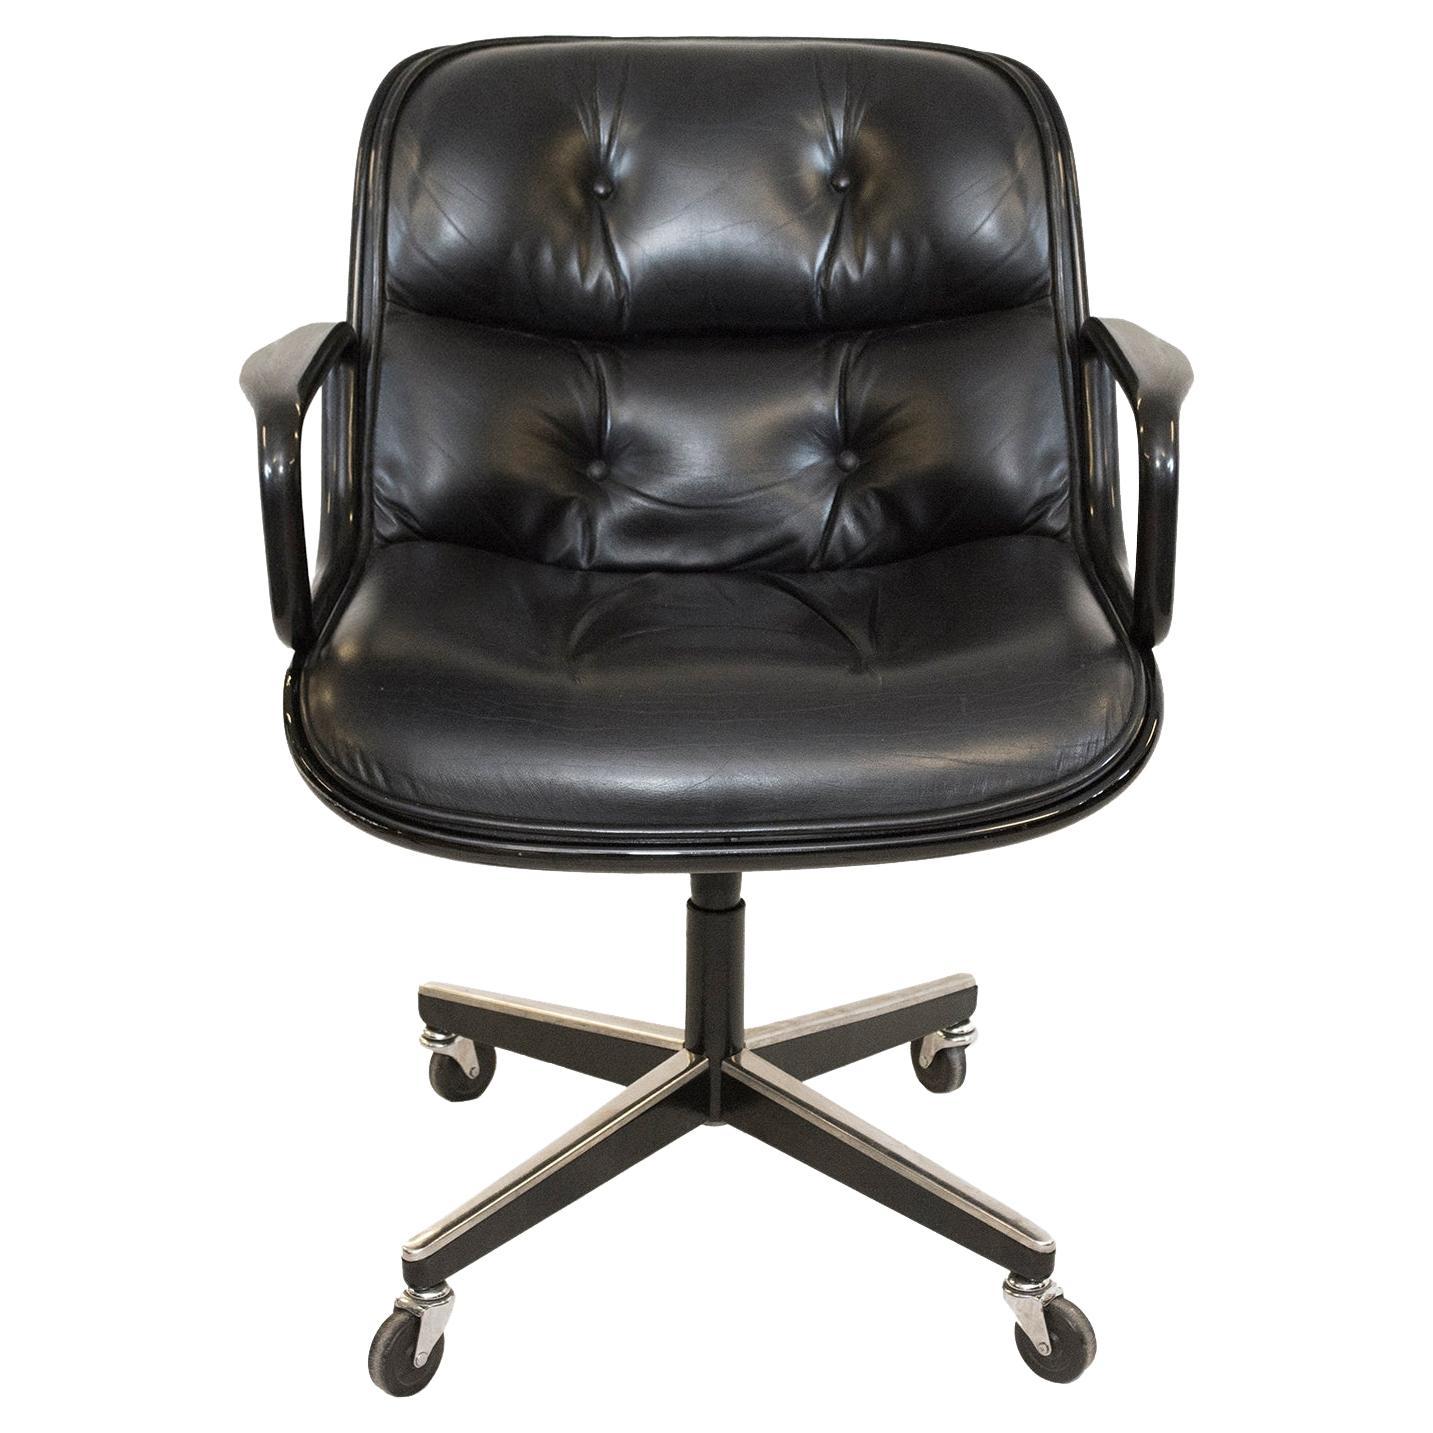 Knoll Pollock Executive Chair reupholstered in Italian Leather, Matte Black